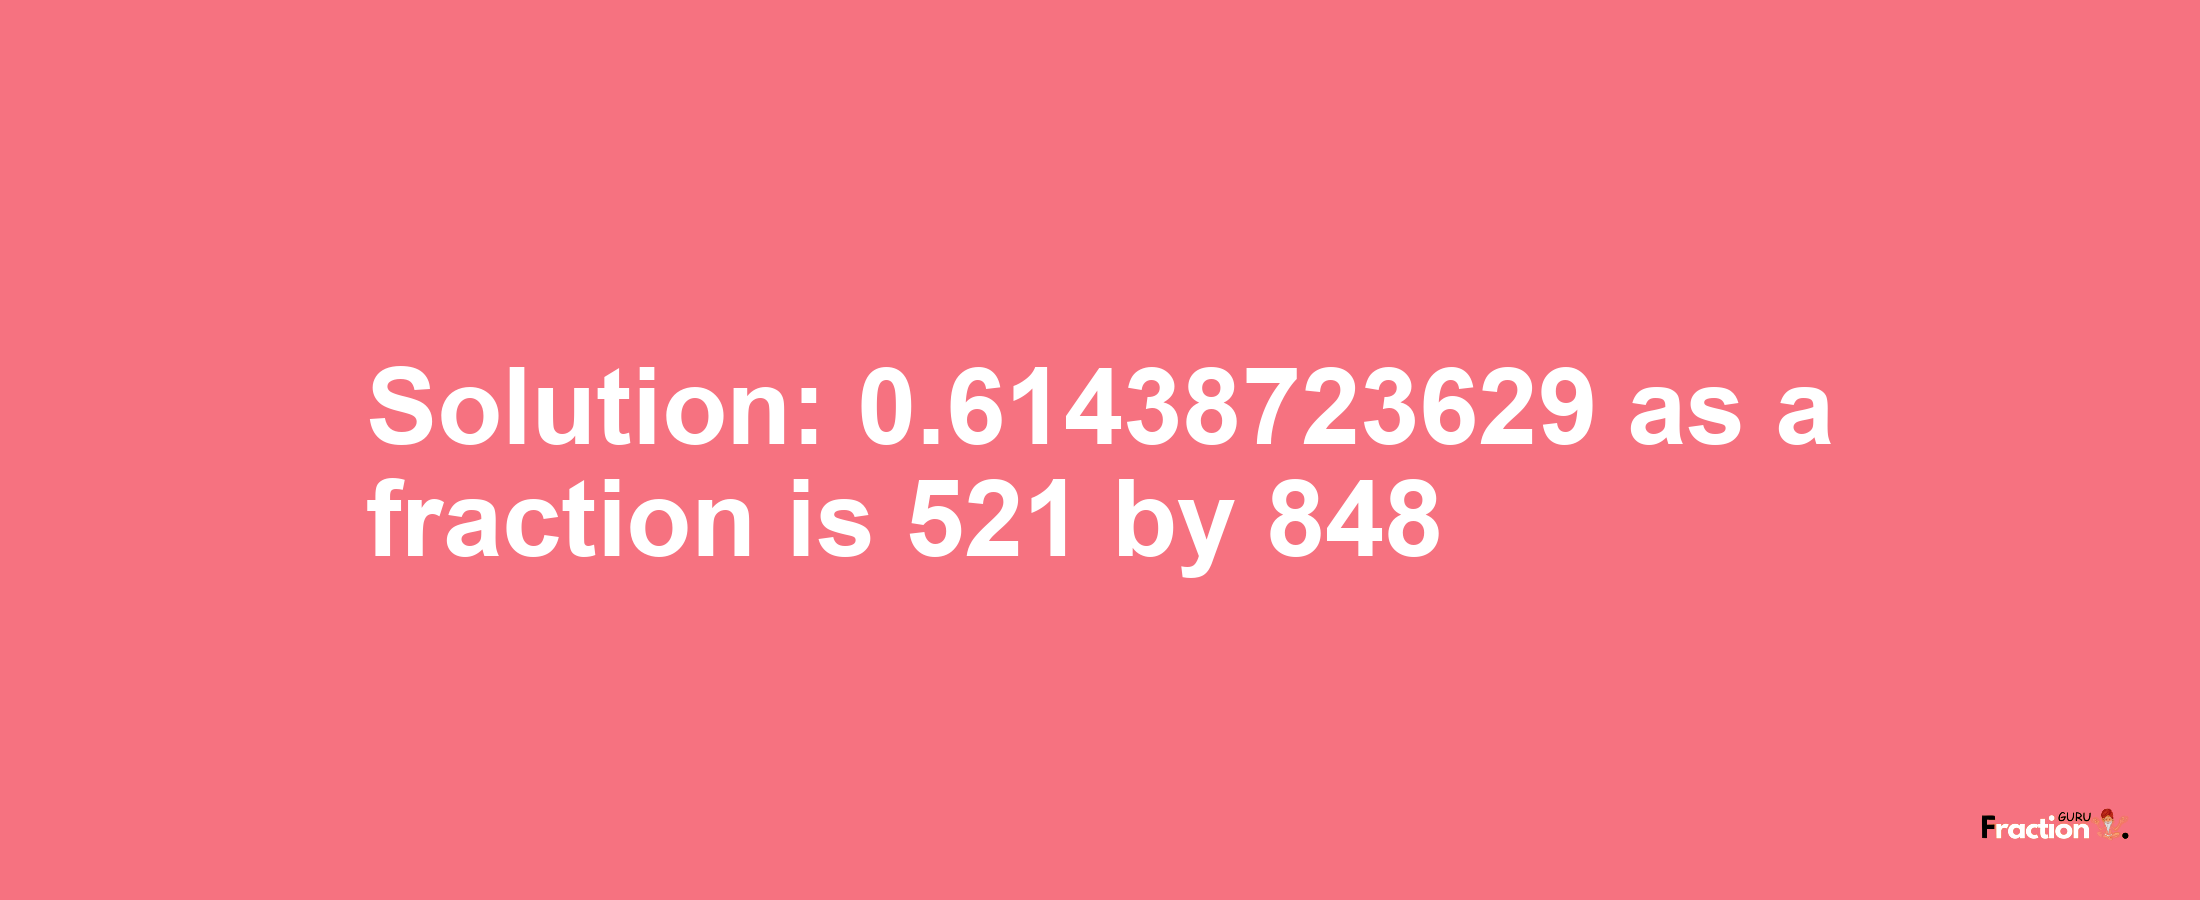 Solution:0.61438723629 as a fraction is 521/848